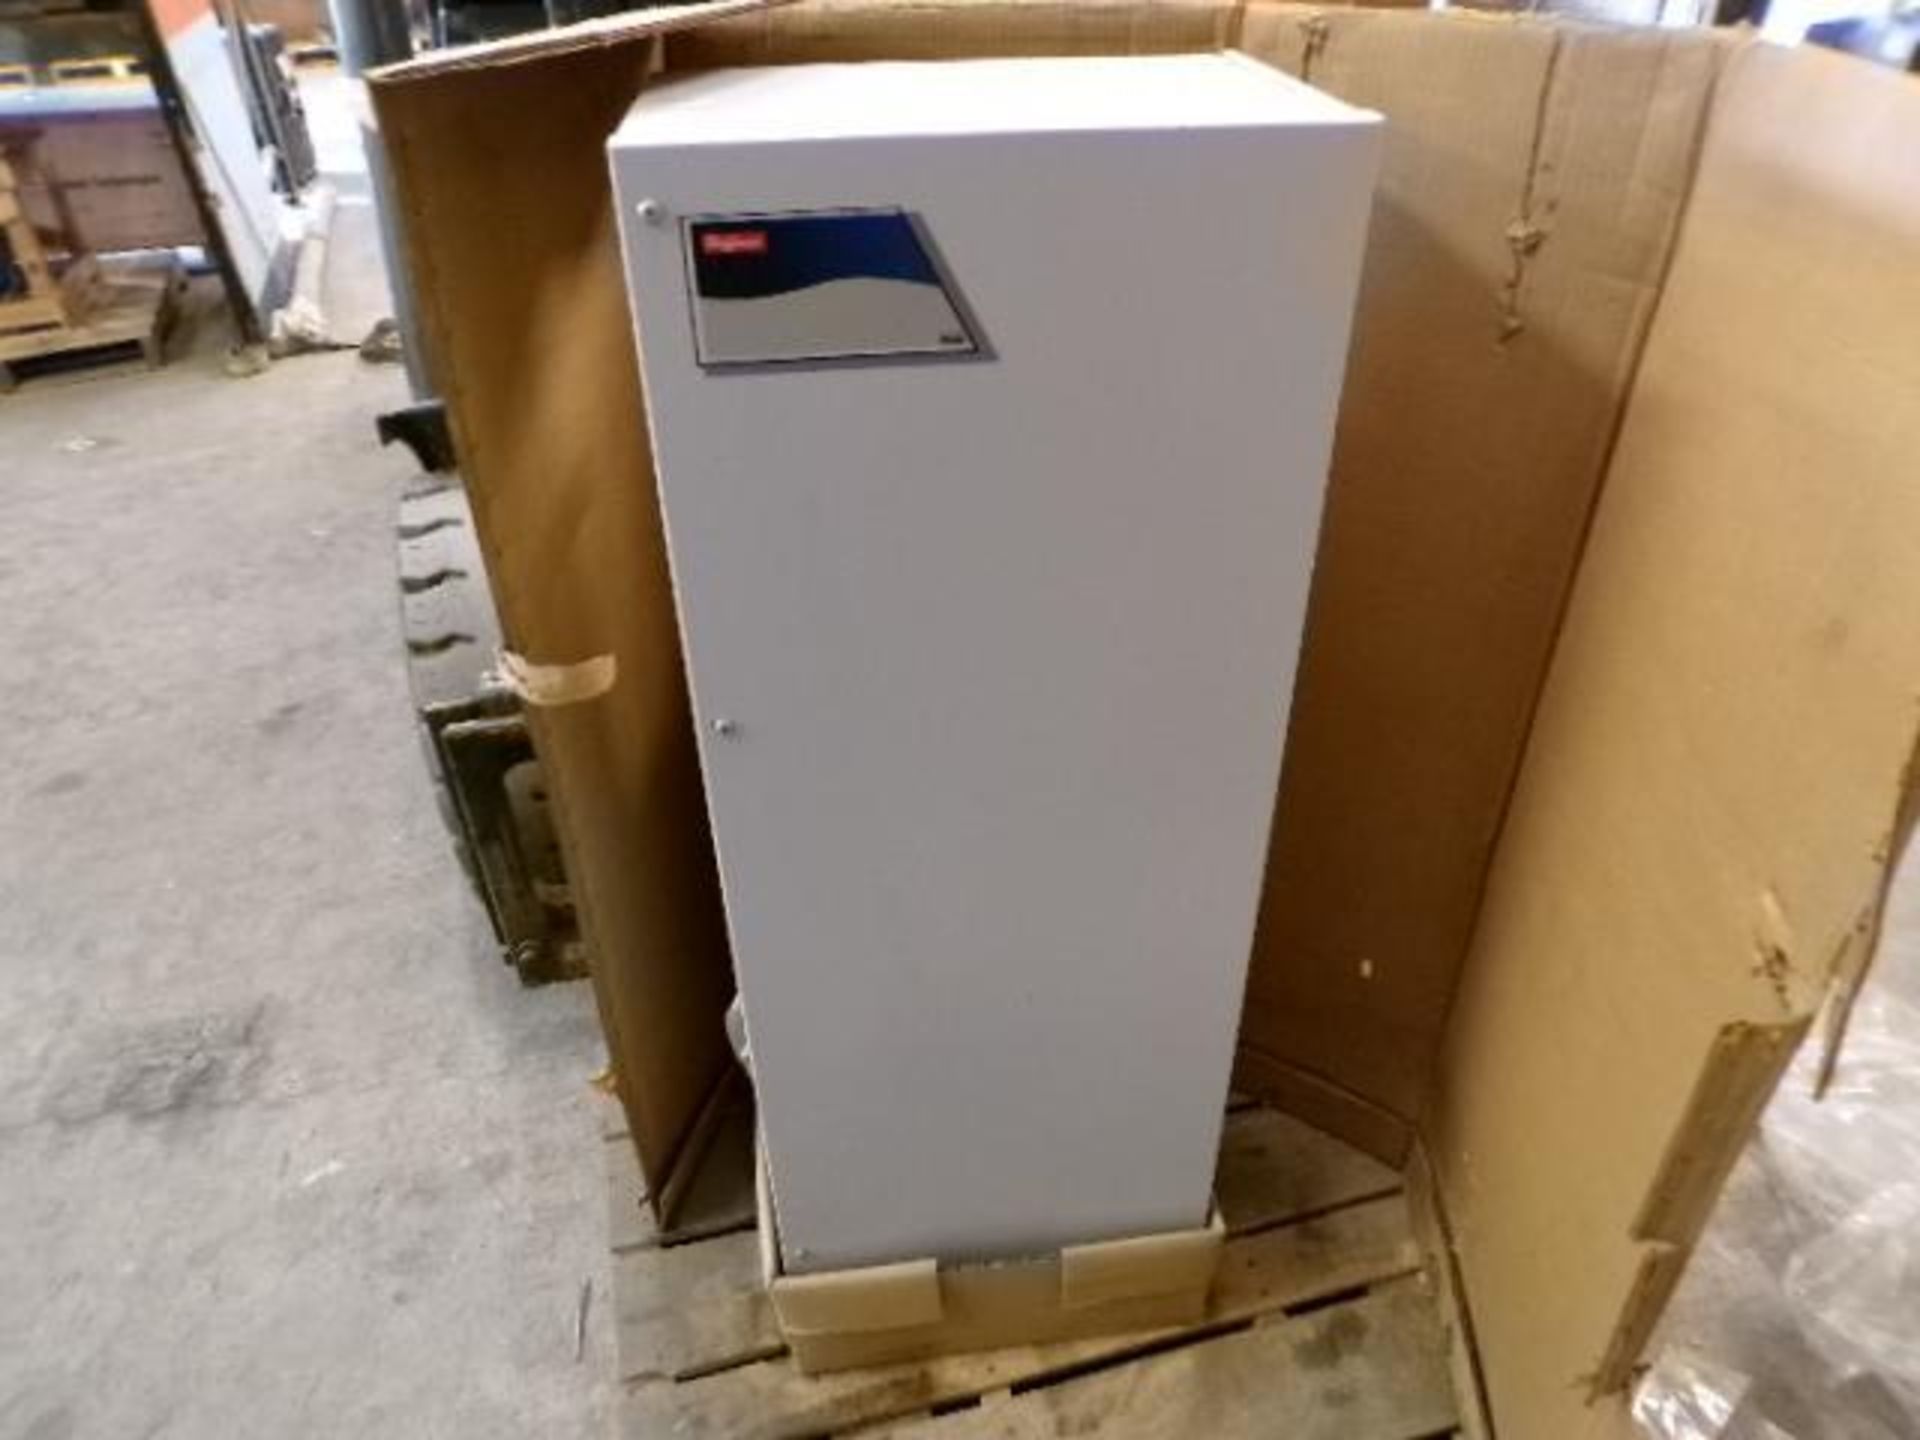 Hoffman Air Conditioner, 6000 BTU, CR43-0626-002 (New) - Image 3 of 4